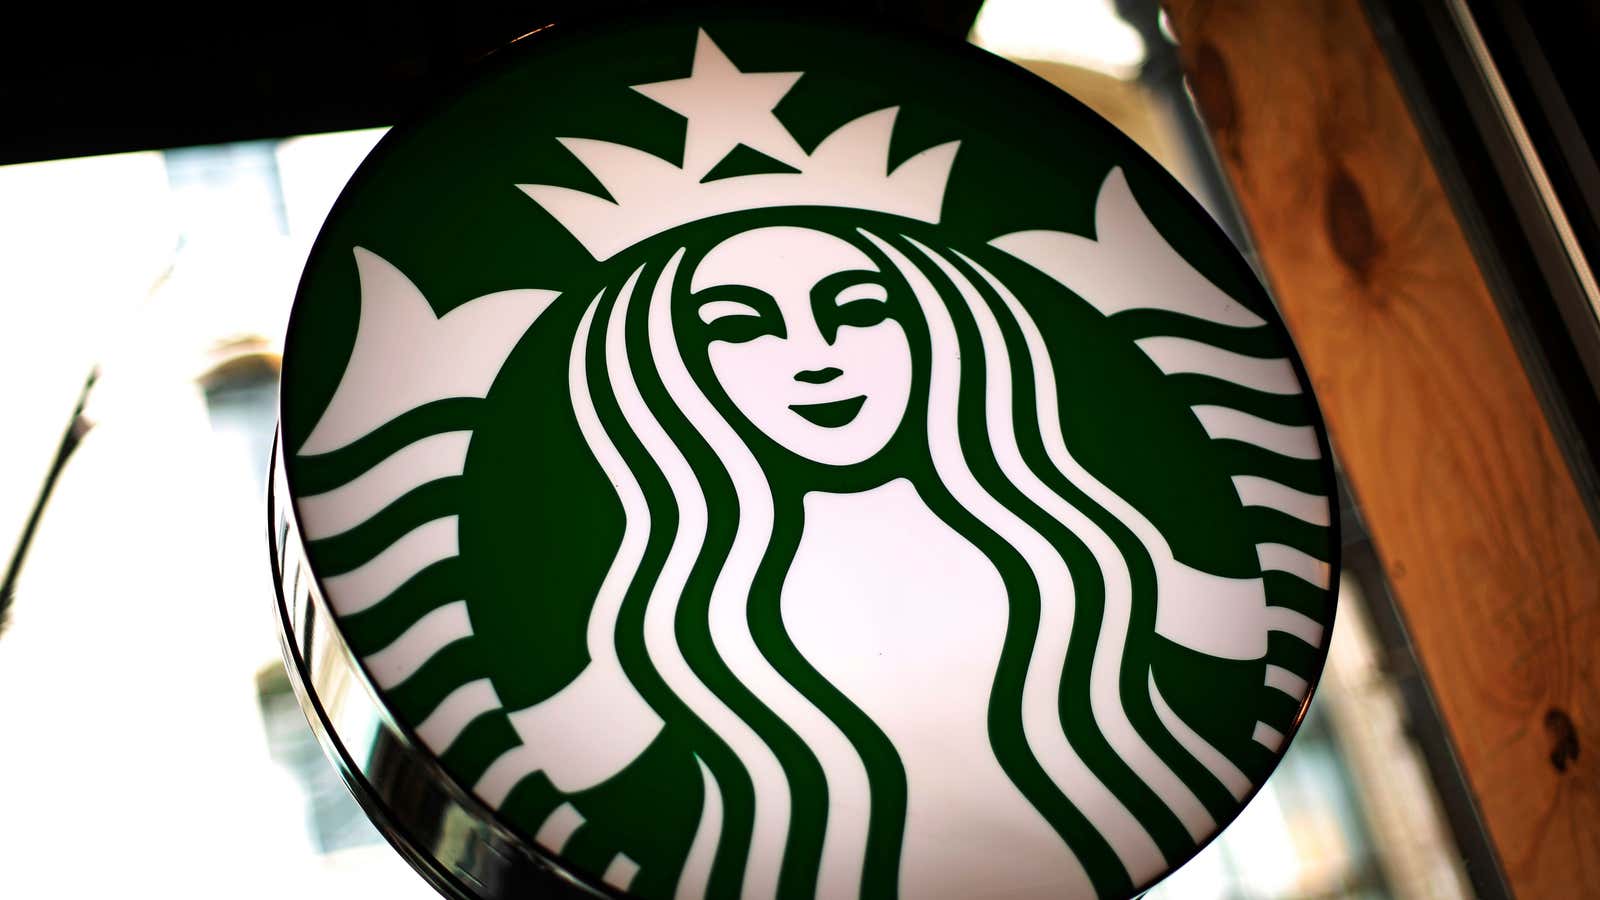 Signs of trouble for Starbucks.